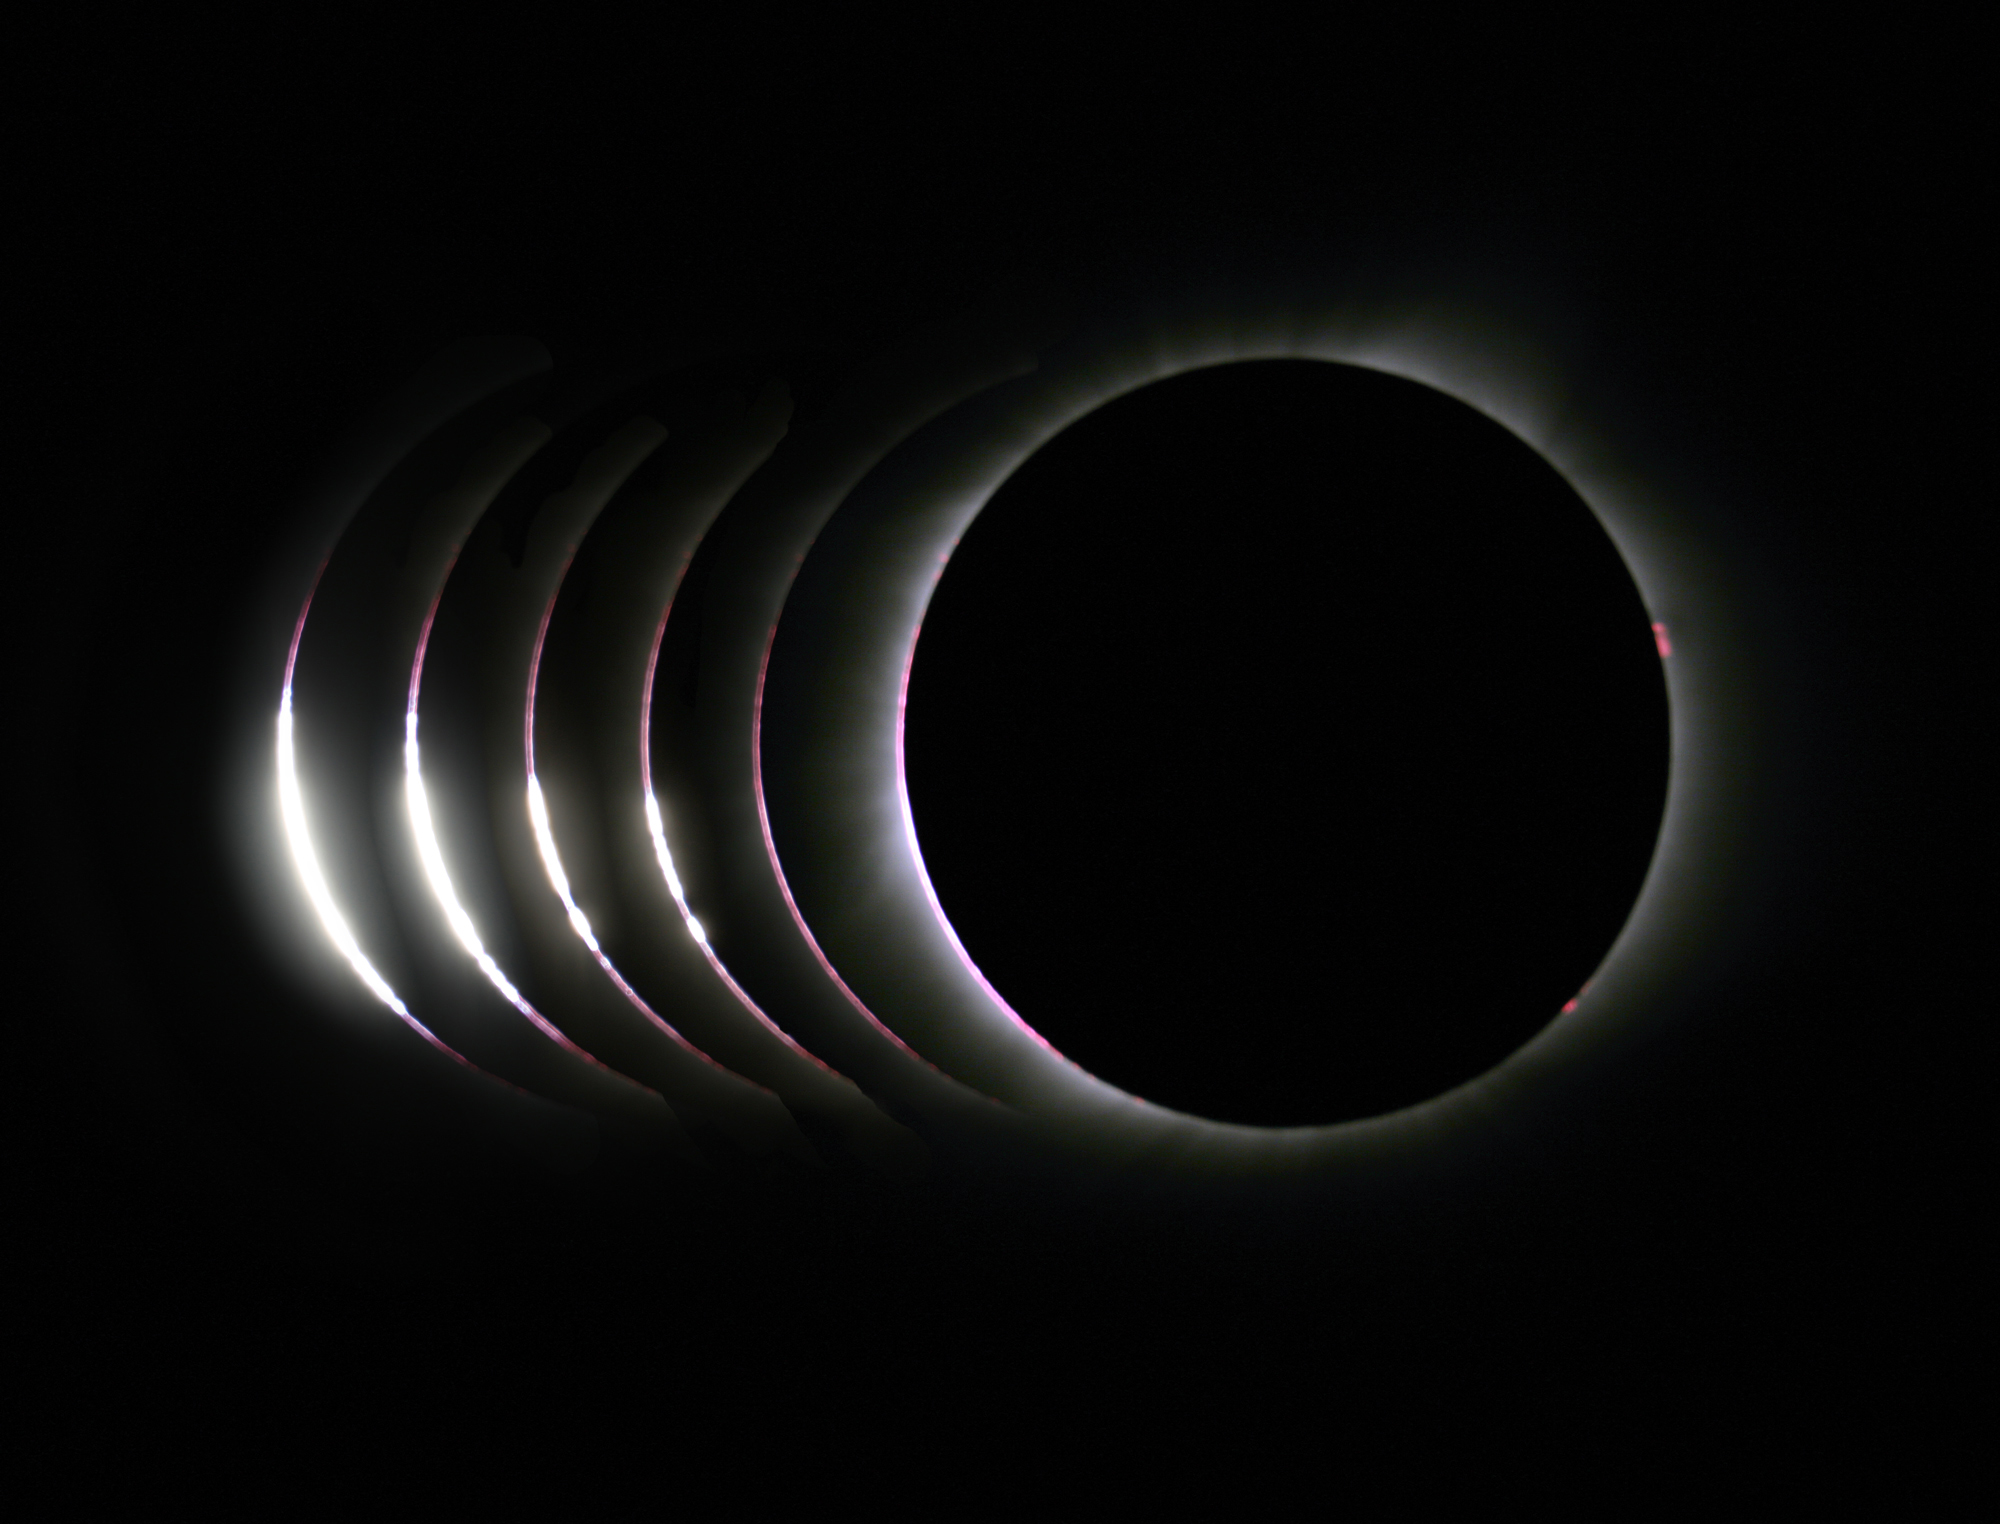 Baily’s beads appear as a string of pearly lights just before totality begins as the last rays of sunlight stream through low-lying regions on the Moon’s limb. As the Moon continues to cover the Sun, the beads disappear until all that is left is one brilliant diamond ring. 